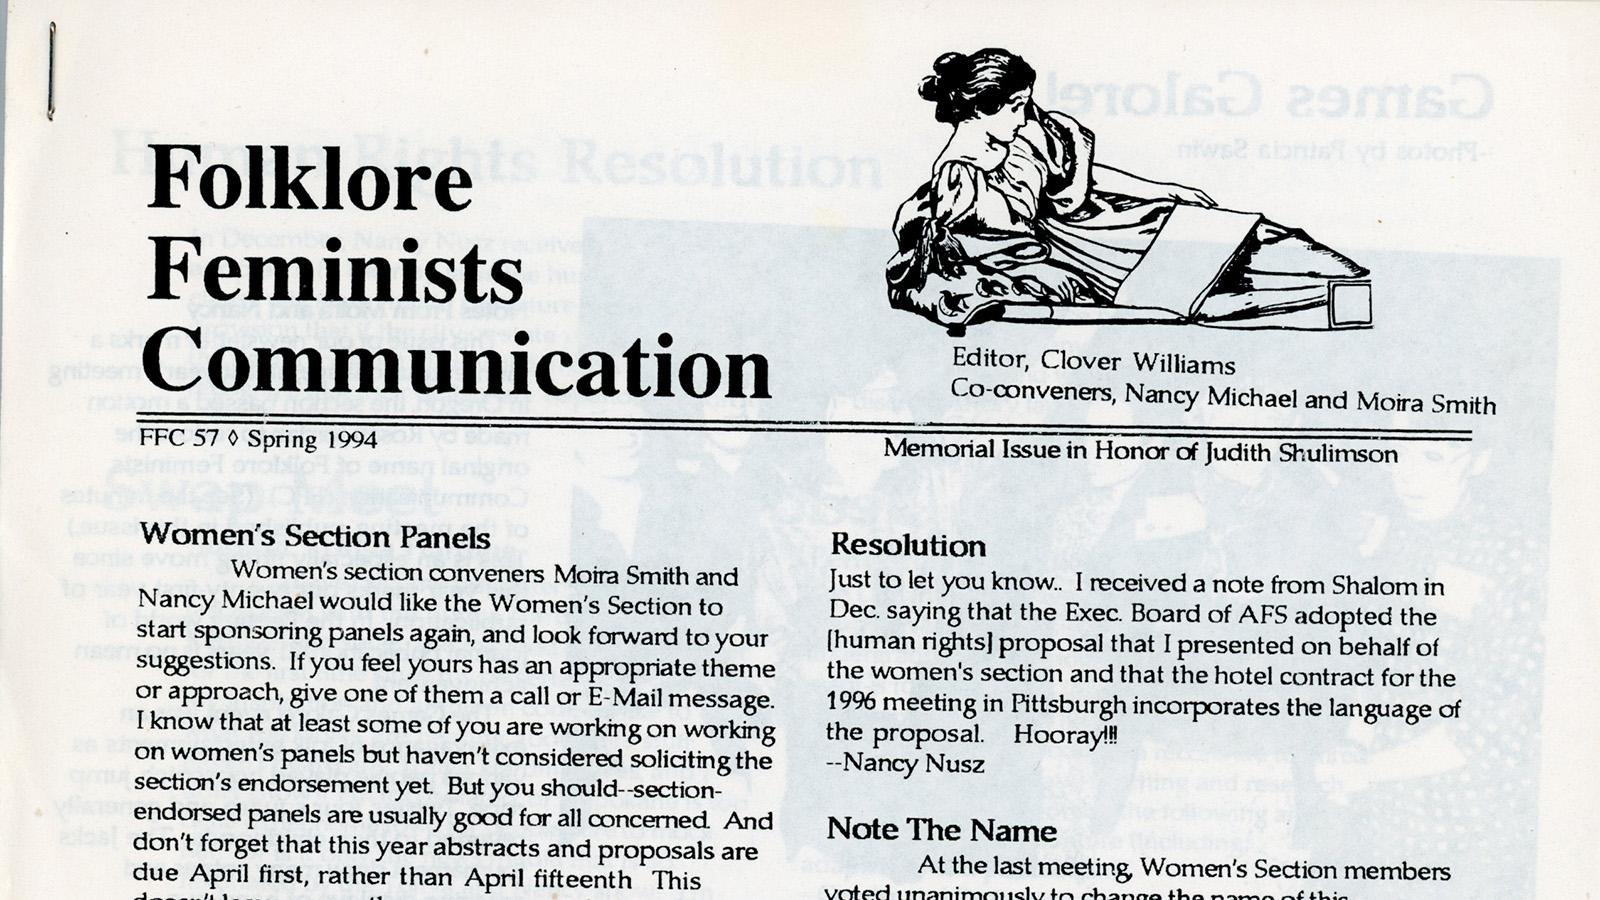 heading of the Folklore Feminists Communication newsletter from Spring 1994 with a line drawing of a reclining Victorian Woman